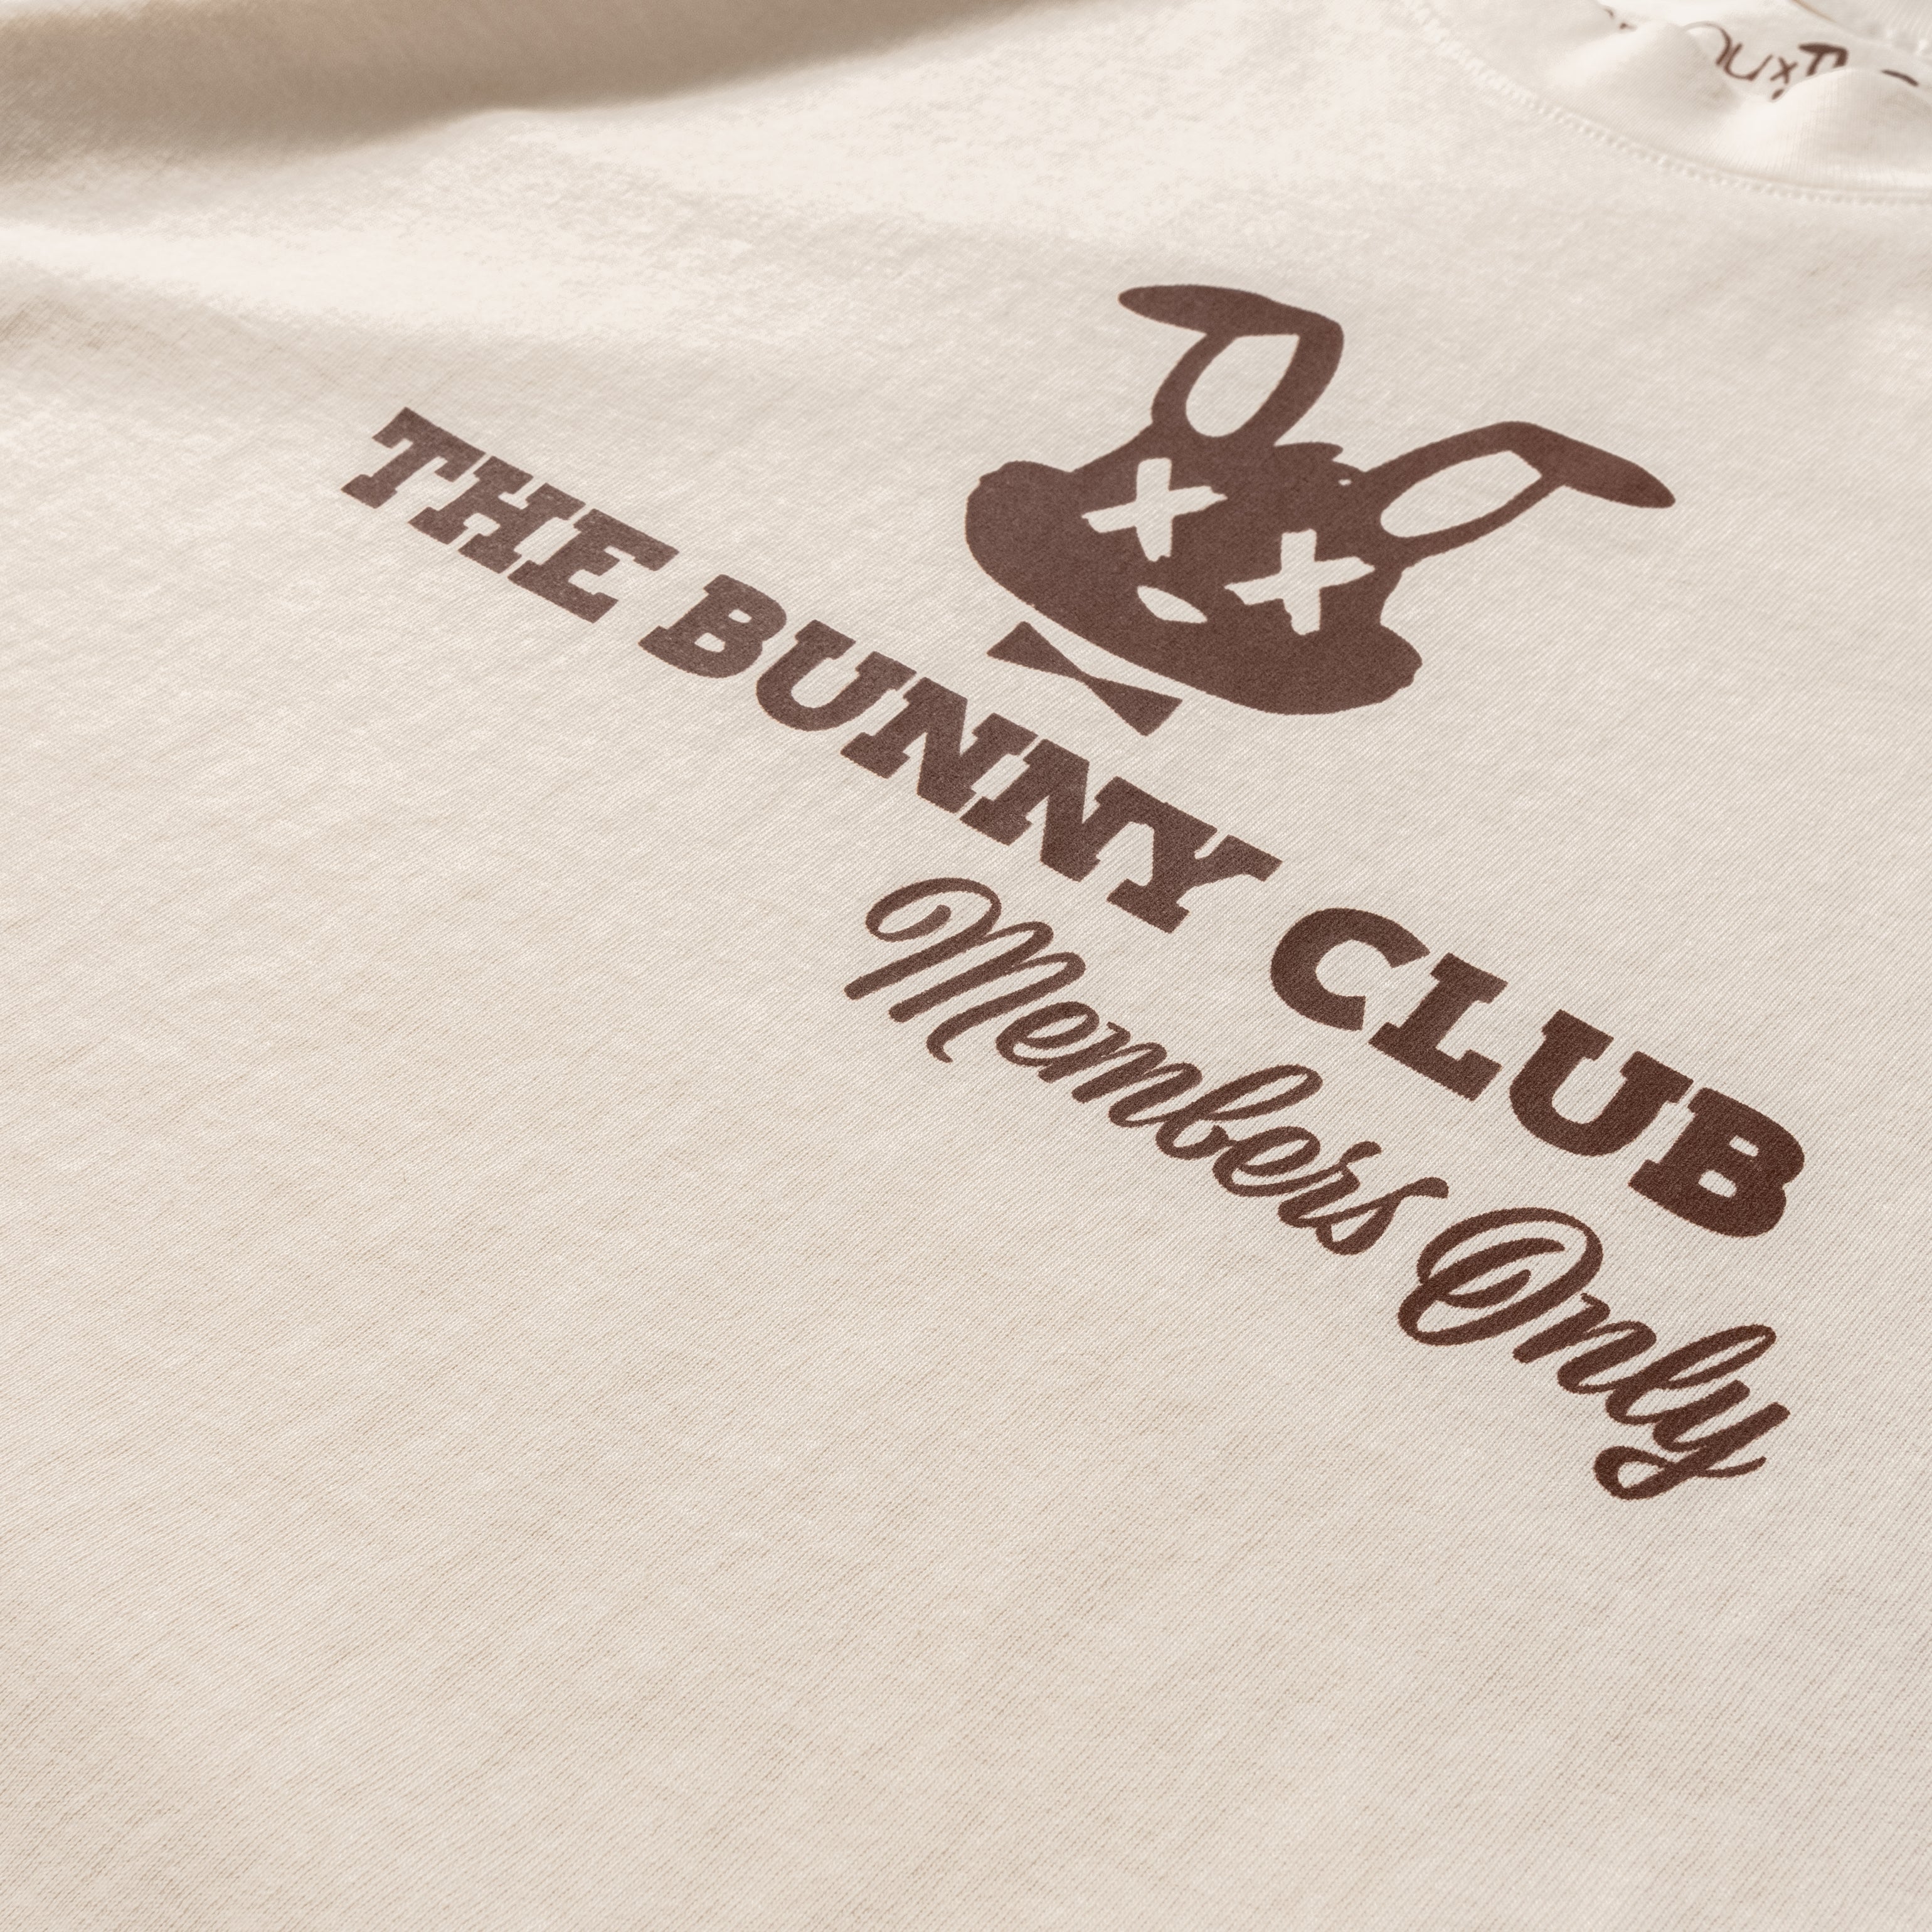 The Bunny Club (Members Only)